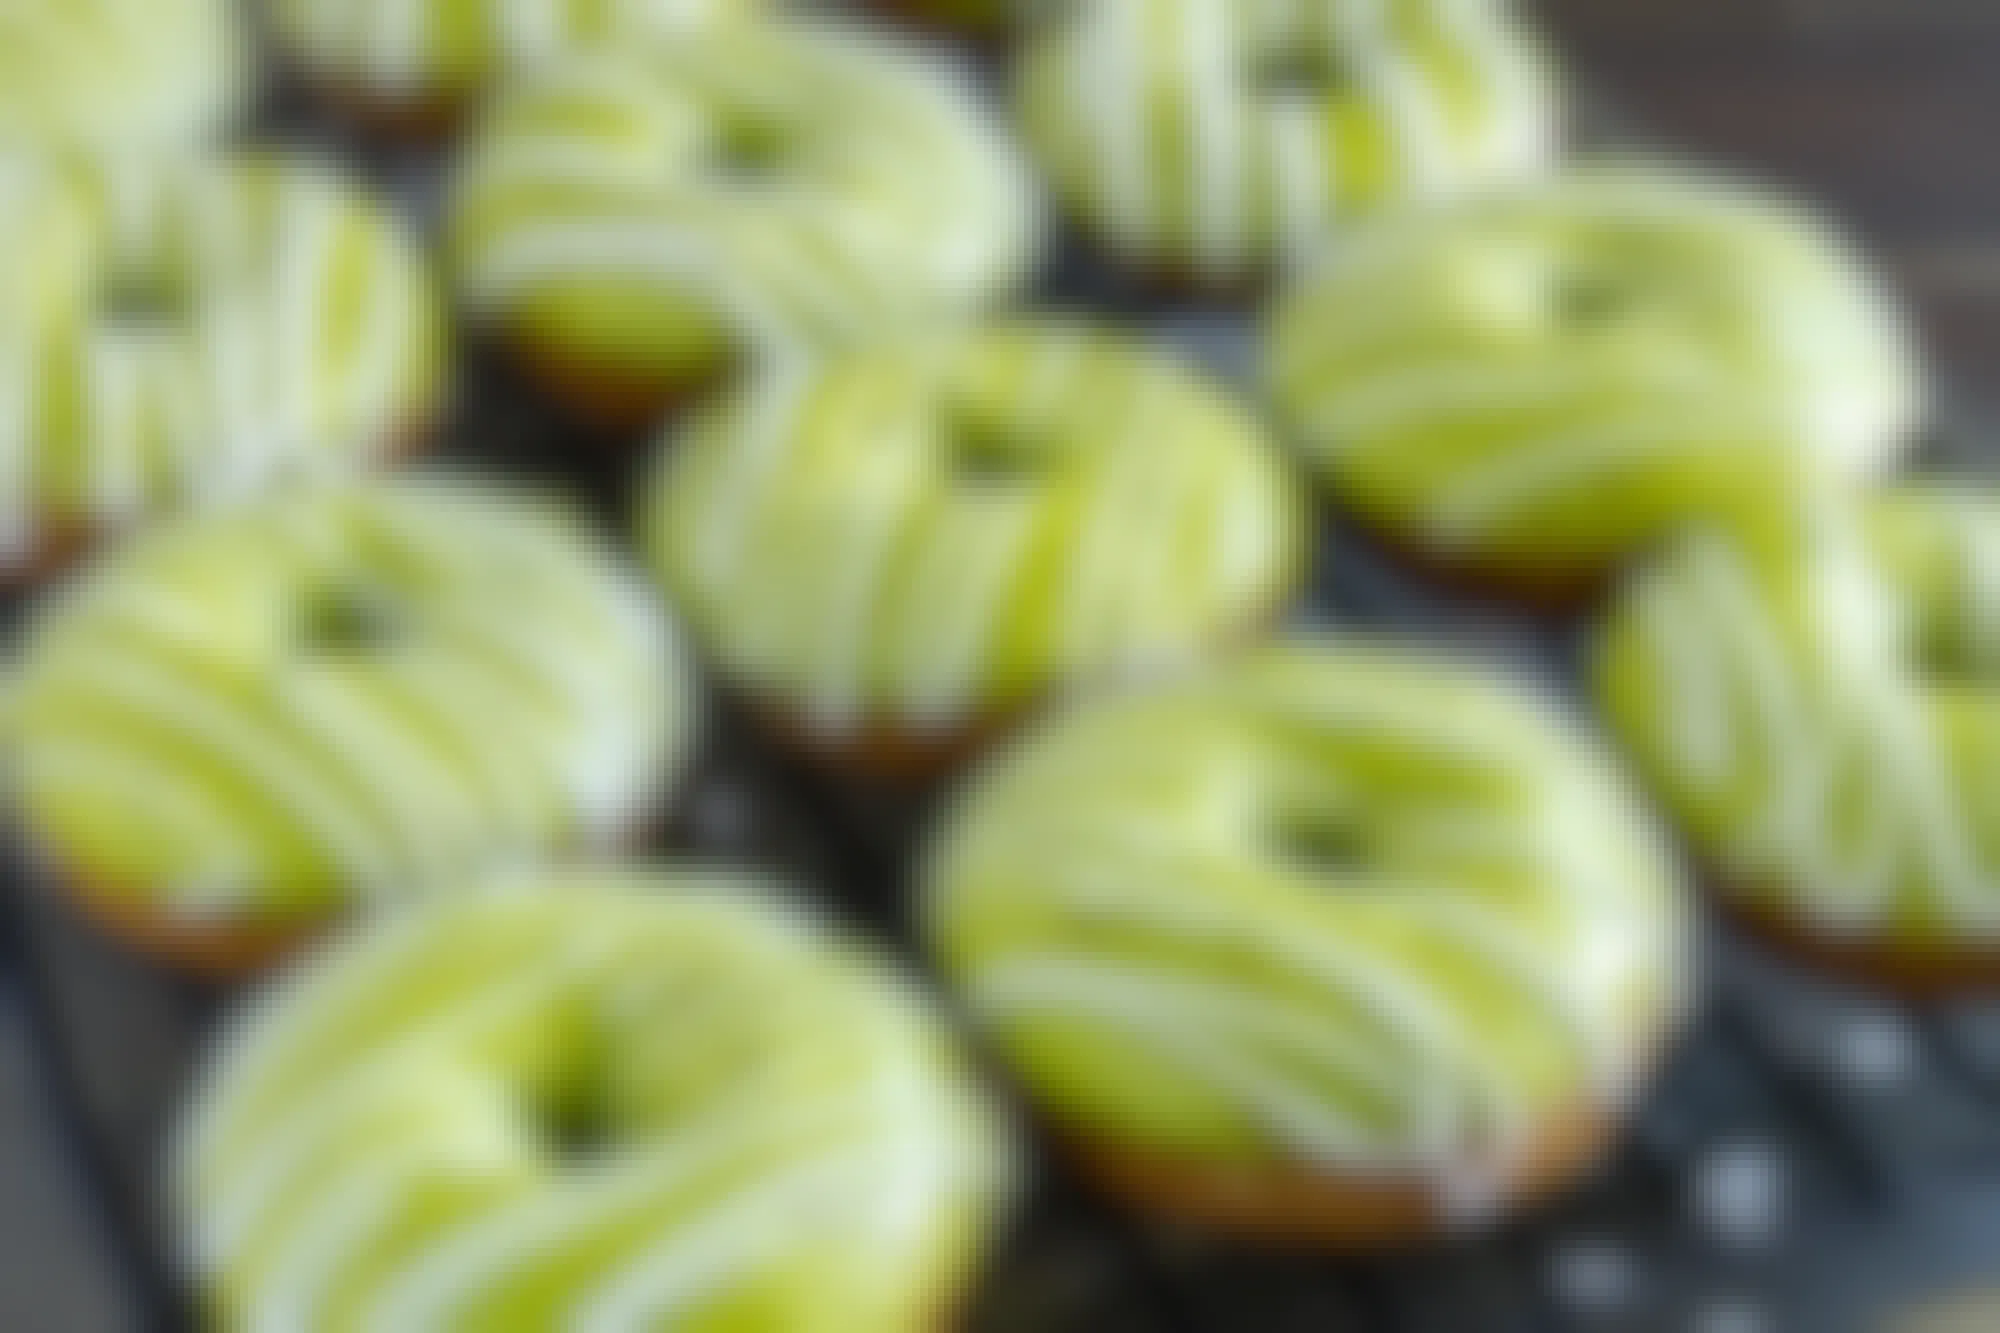 Doughnuts with green glaze on a cooling rack